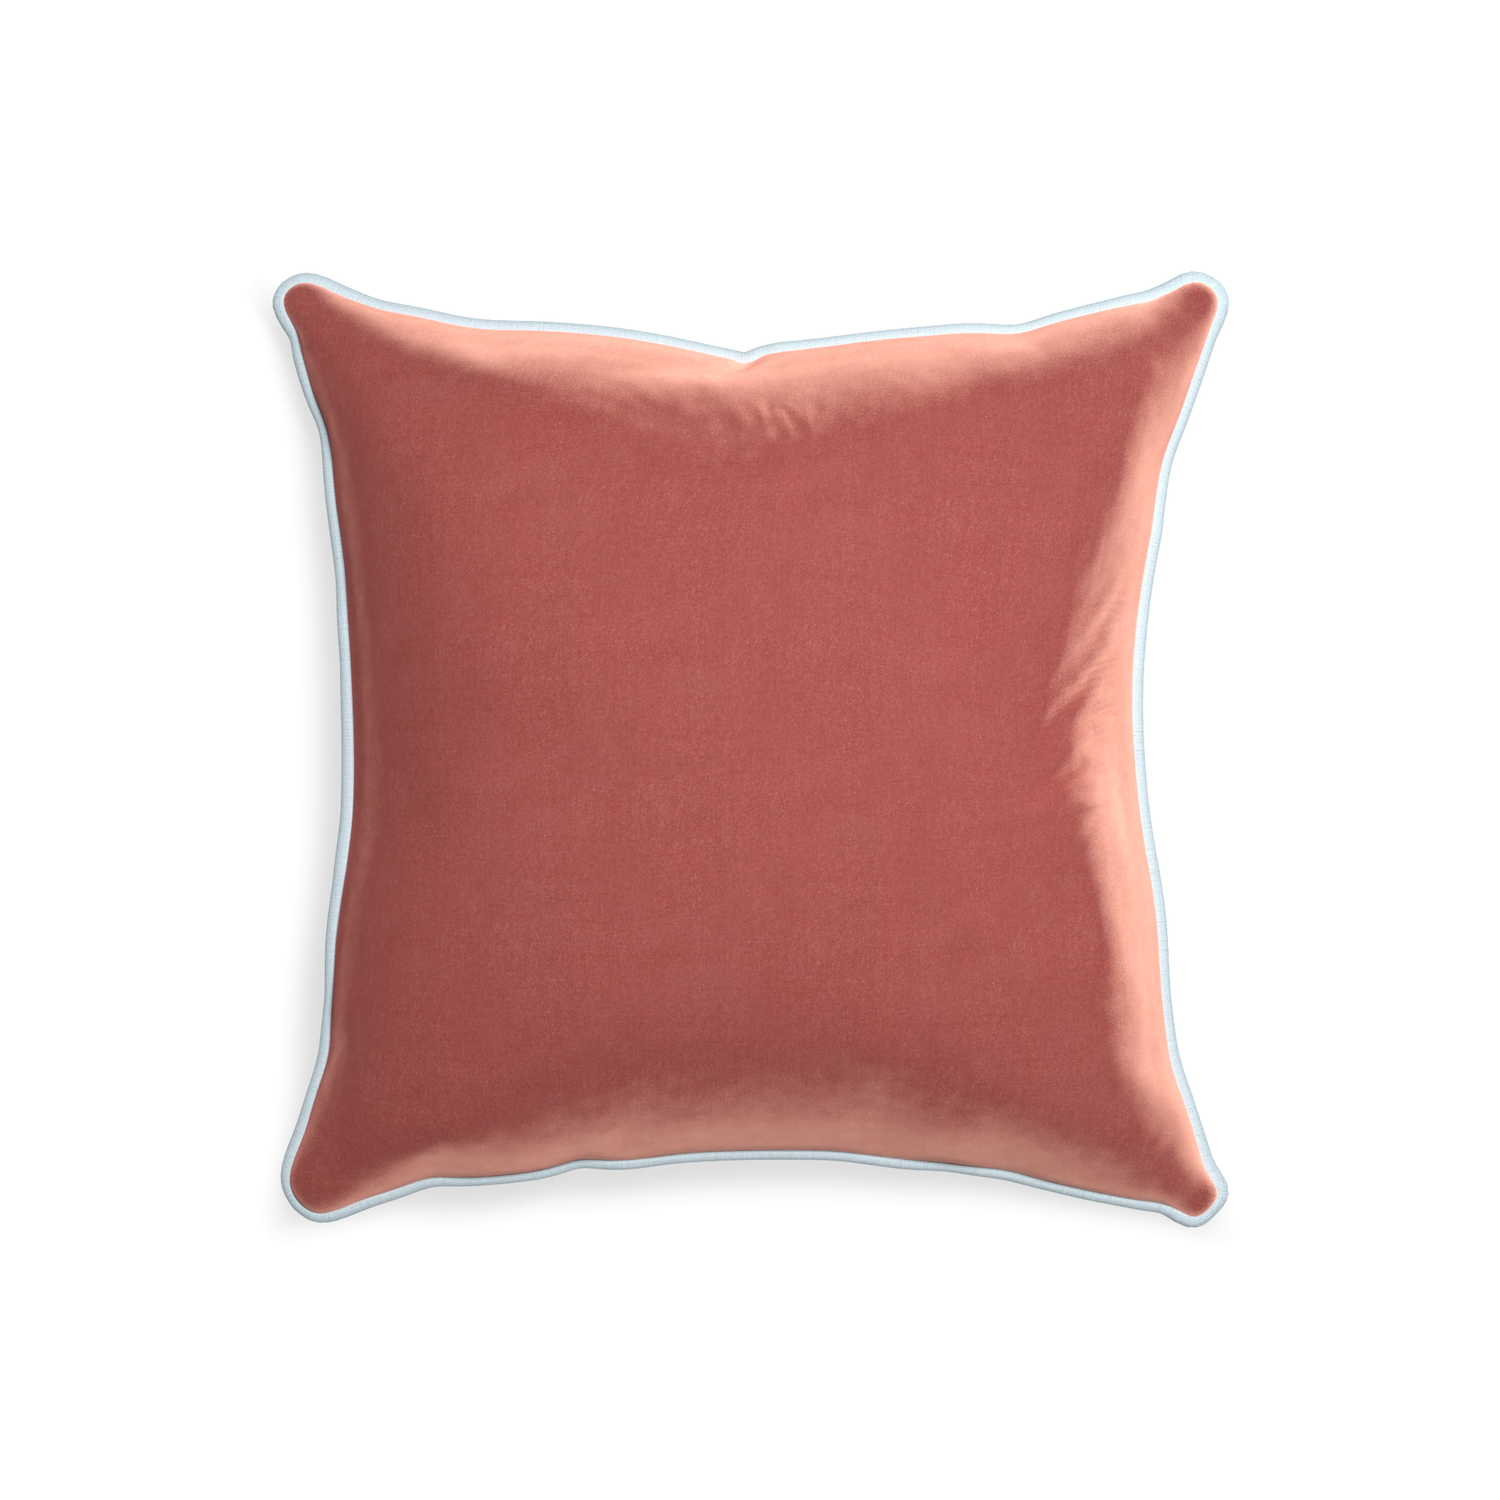 20-square cosmo velvet custom coralpillow with powder piping on white background